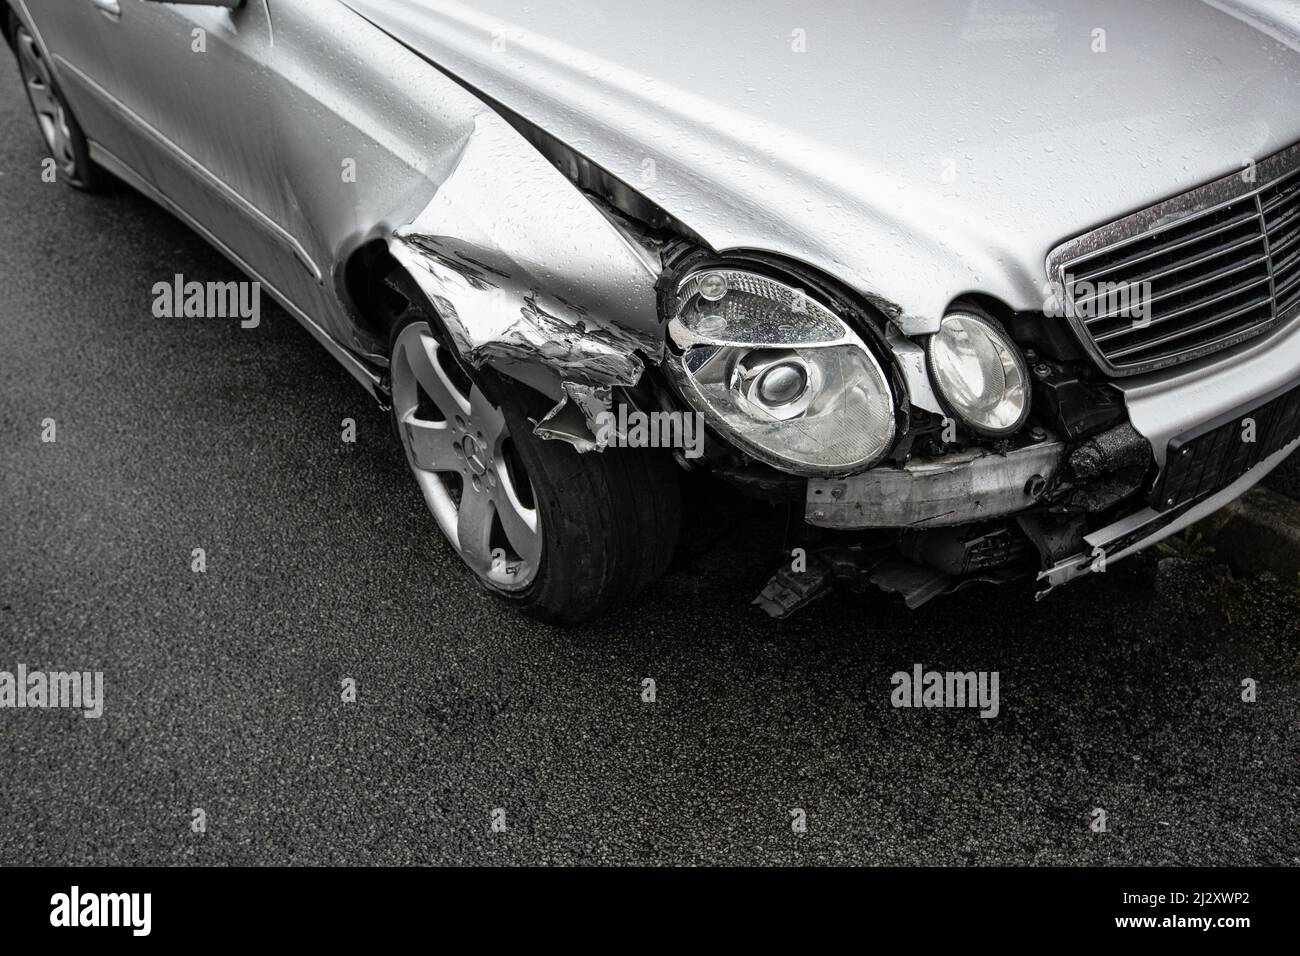 A close up of the damage to a silver car's front wing, wheel and headlights involved in a road traffic accident with copy space Stock Photo